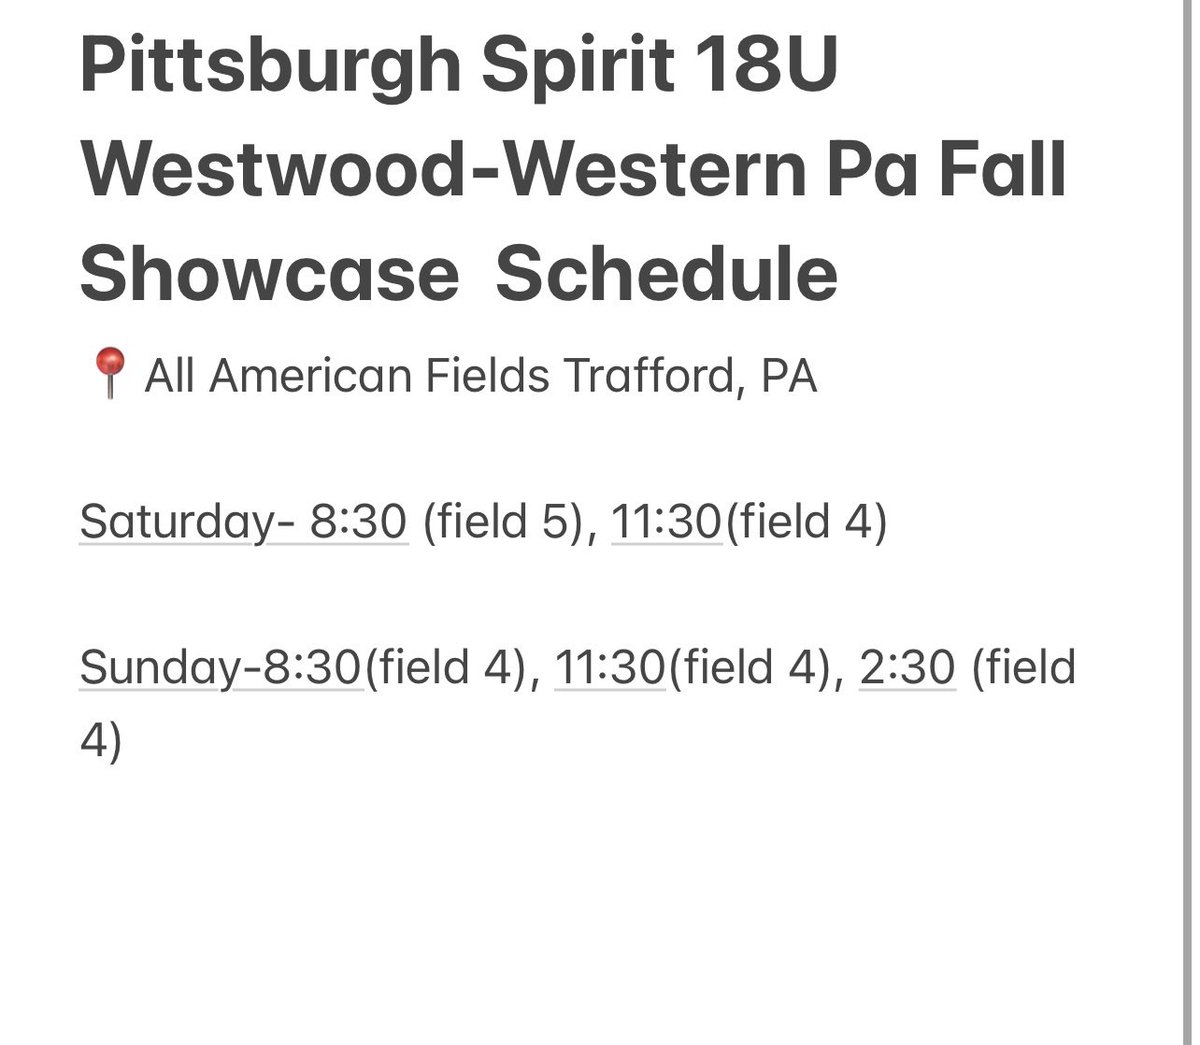 Schedule for this weekend in Trafford, PA! Can't wait and hope the weather holds off! @SVC_Softball @IUPsoftball @CALU_softball @Gannon_Softball @jcu_softball @BoroAthletics @washjeffSB @UPJSoftball @CoachJexx_RMU @RMUSoftball